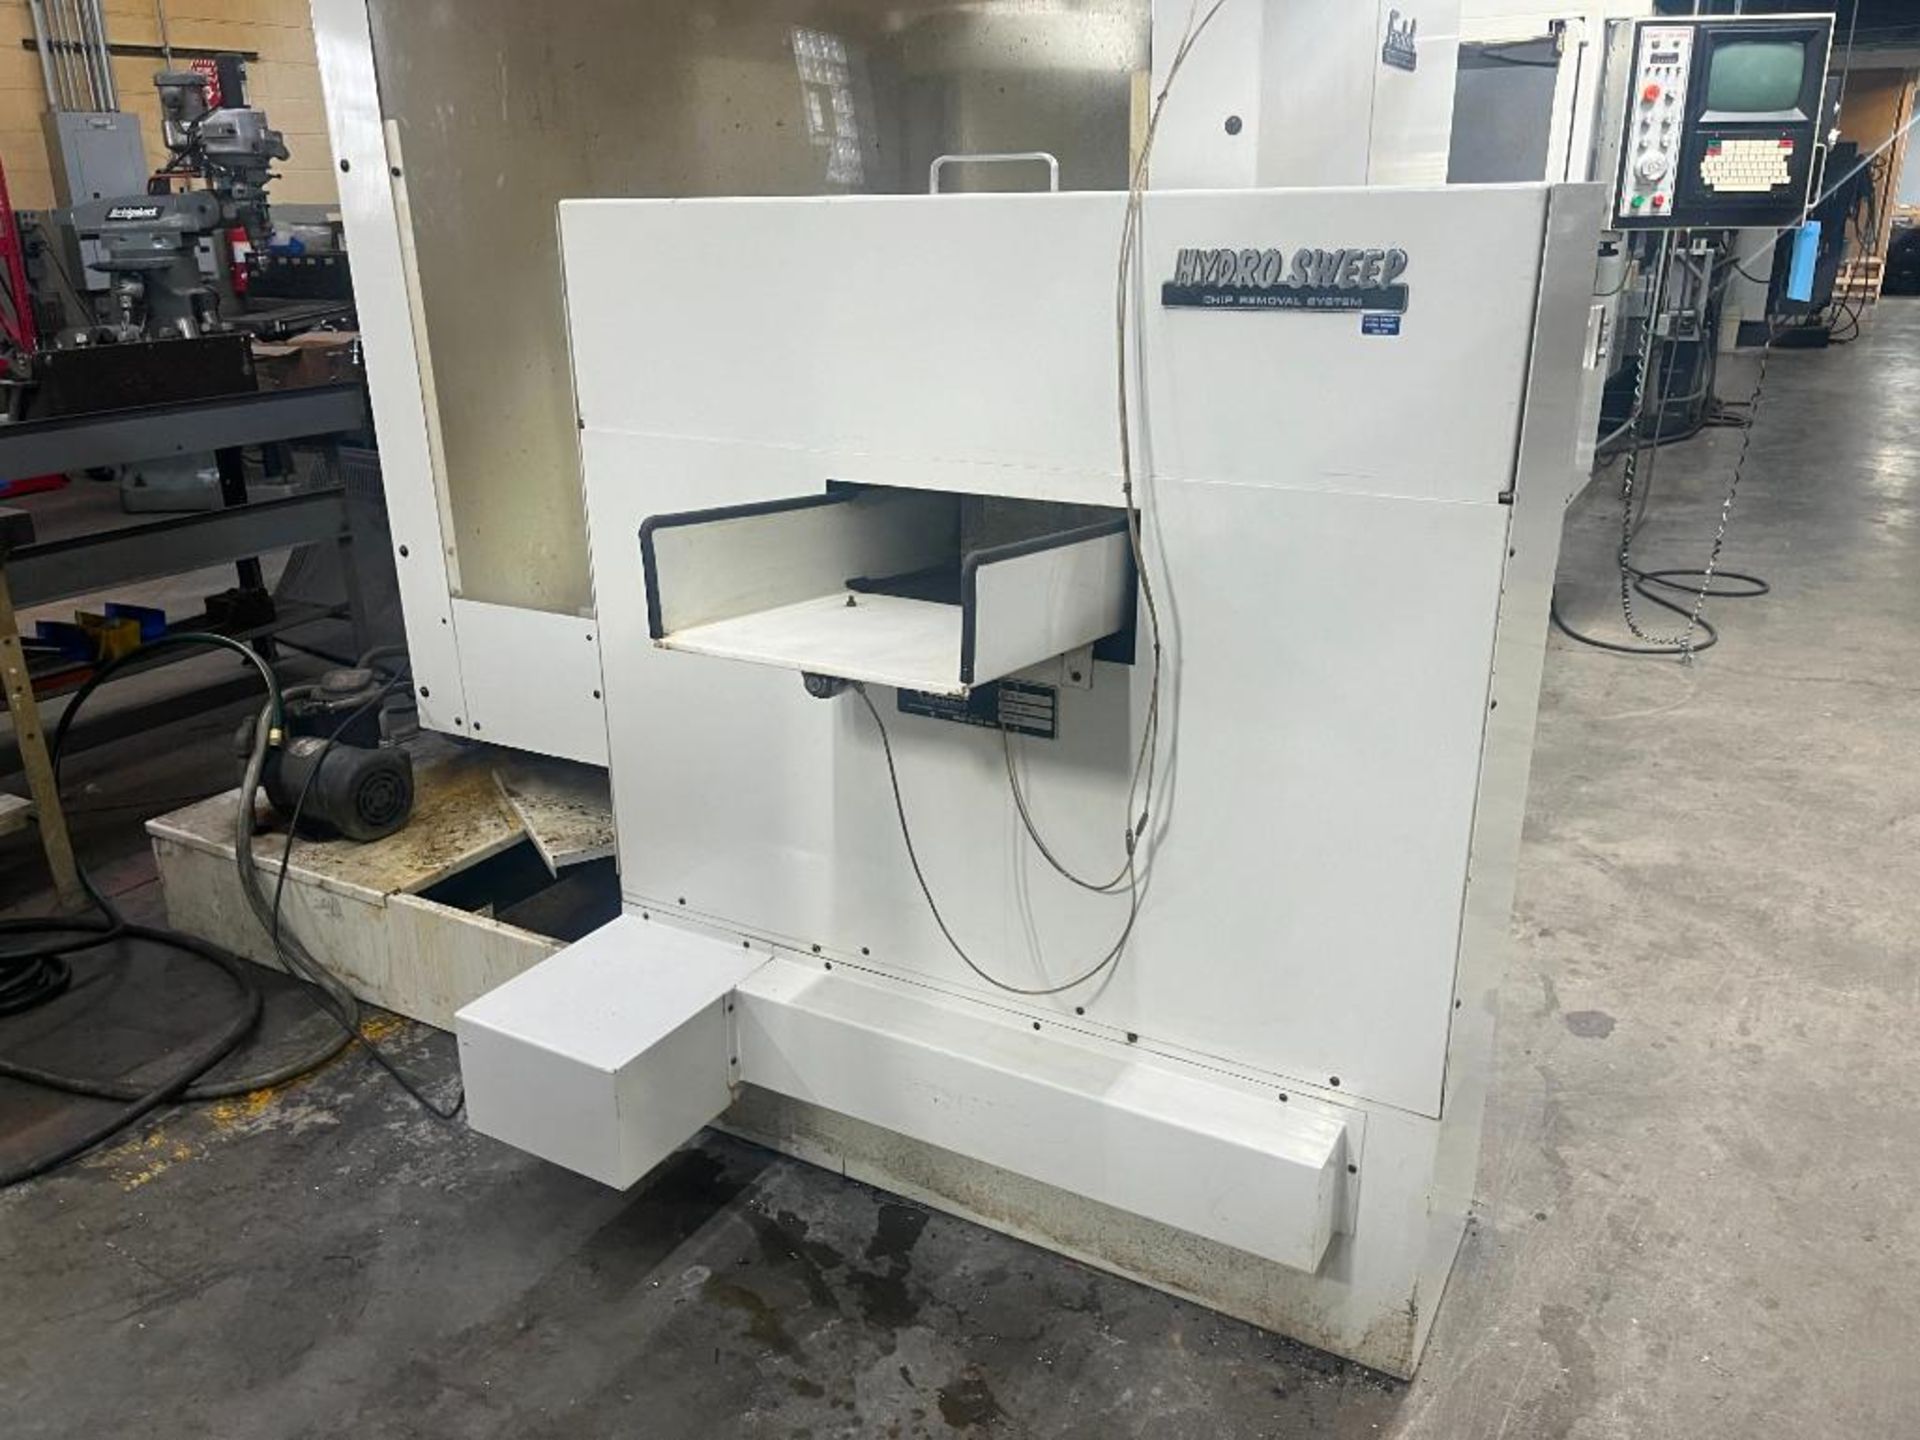 Fadal CNC Vertical Machining Center Model Model 907-1 VMC 6030HT, S/N 9704645 (1997) with Fadal CNC8 - Image 30 of 33